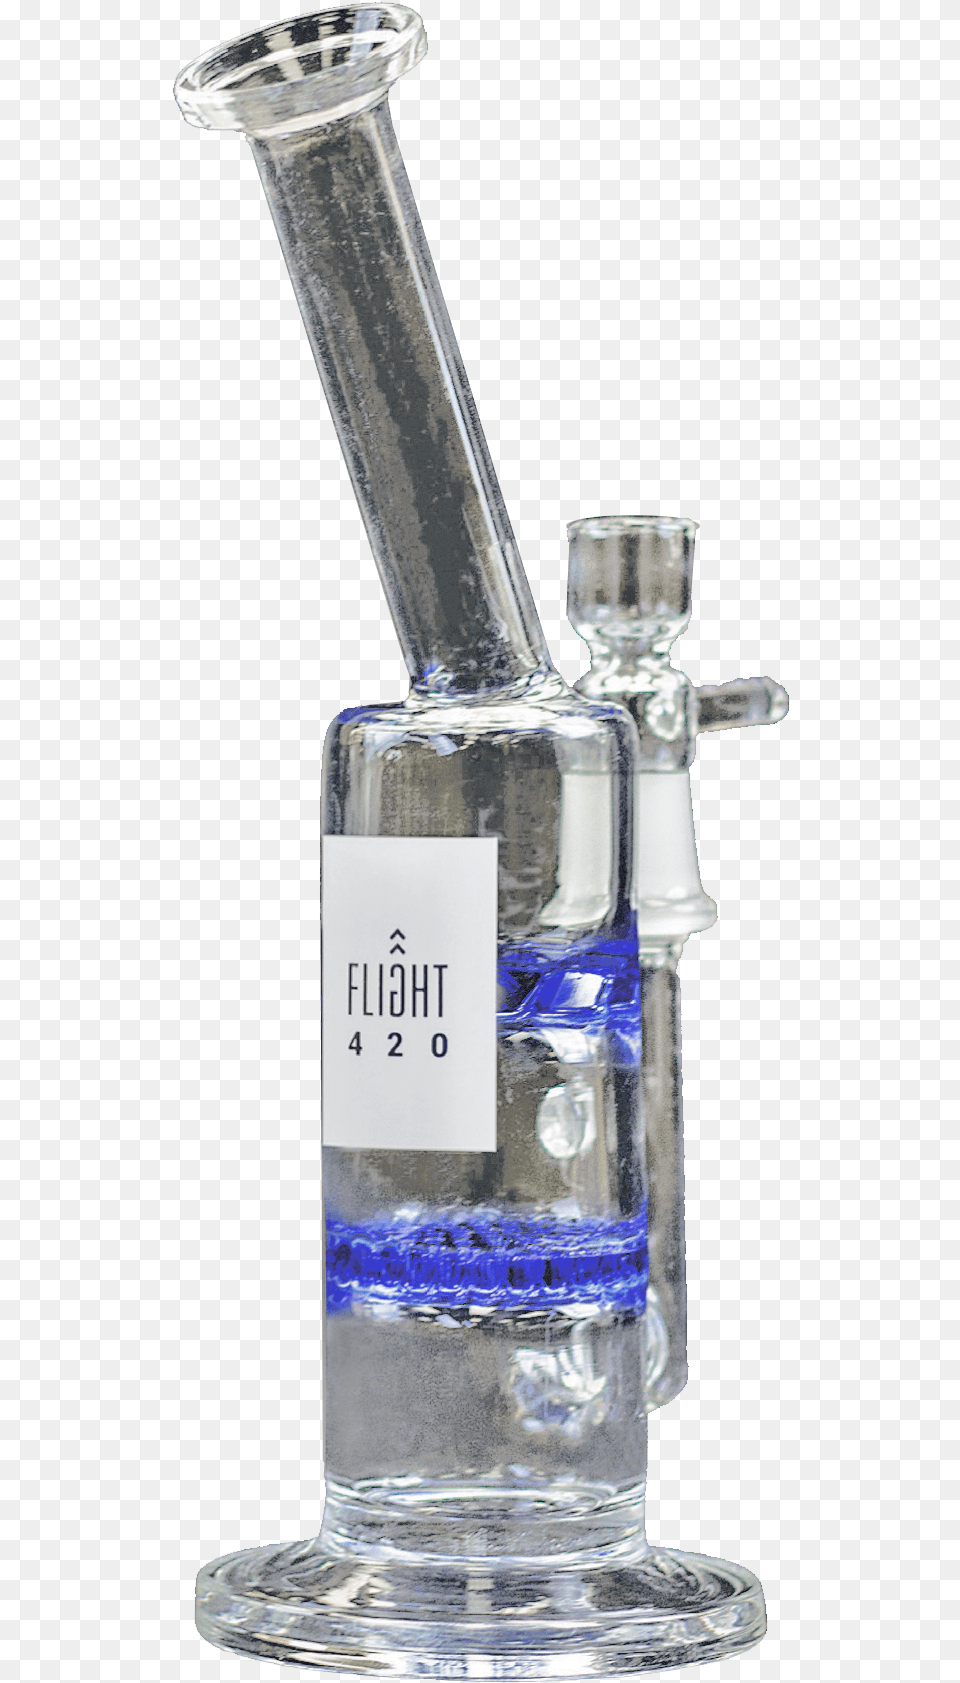 Flight 420 Water Pipe Th 10 Quothorizonquot Glass Bottle, Smoke Pipe, Cup, Cannon, Weapon Free Png Download